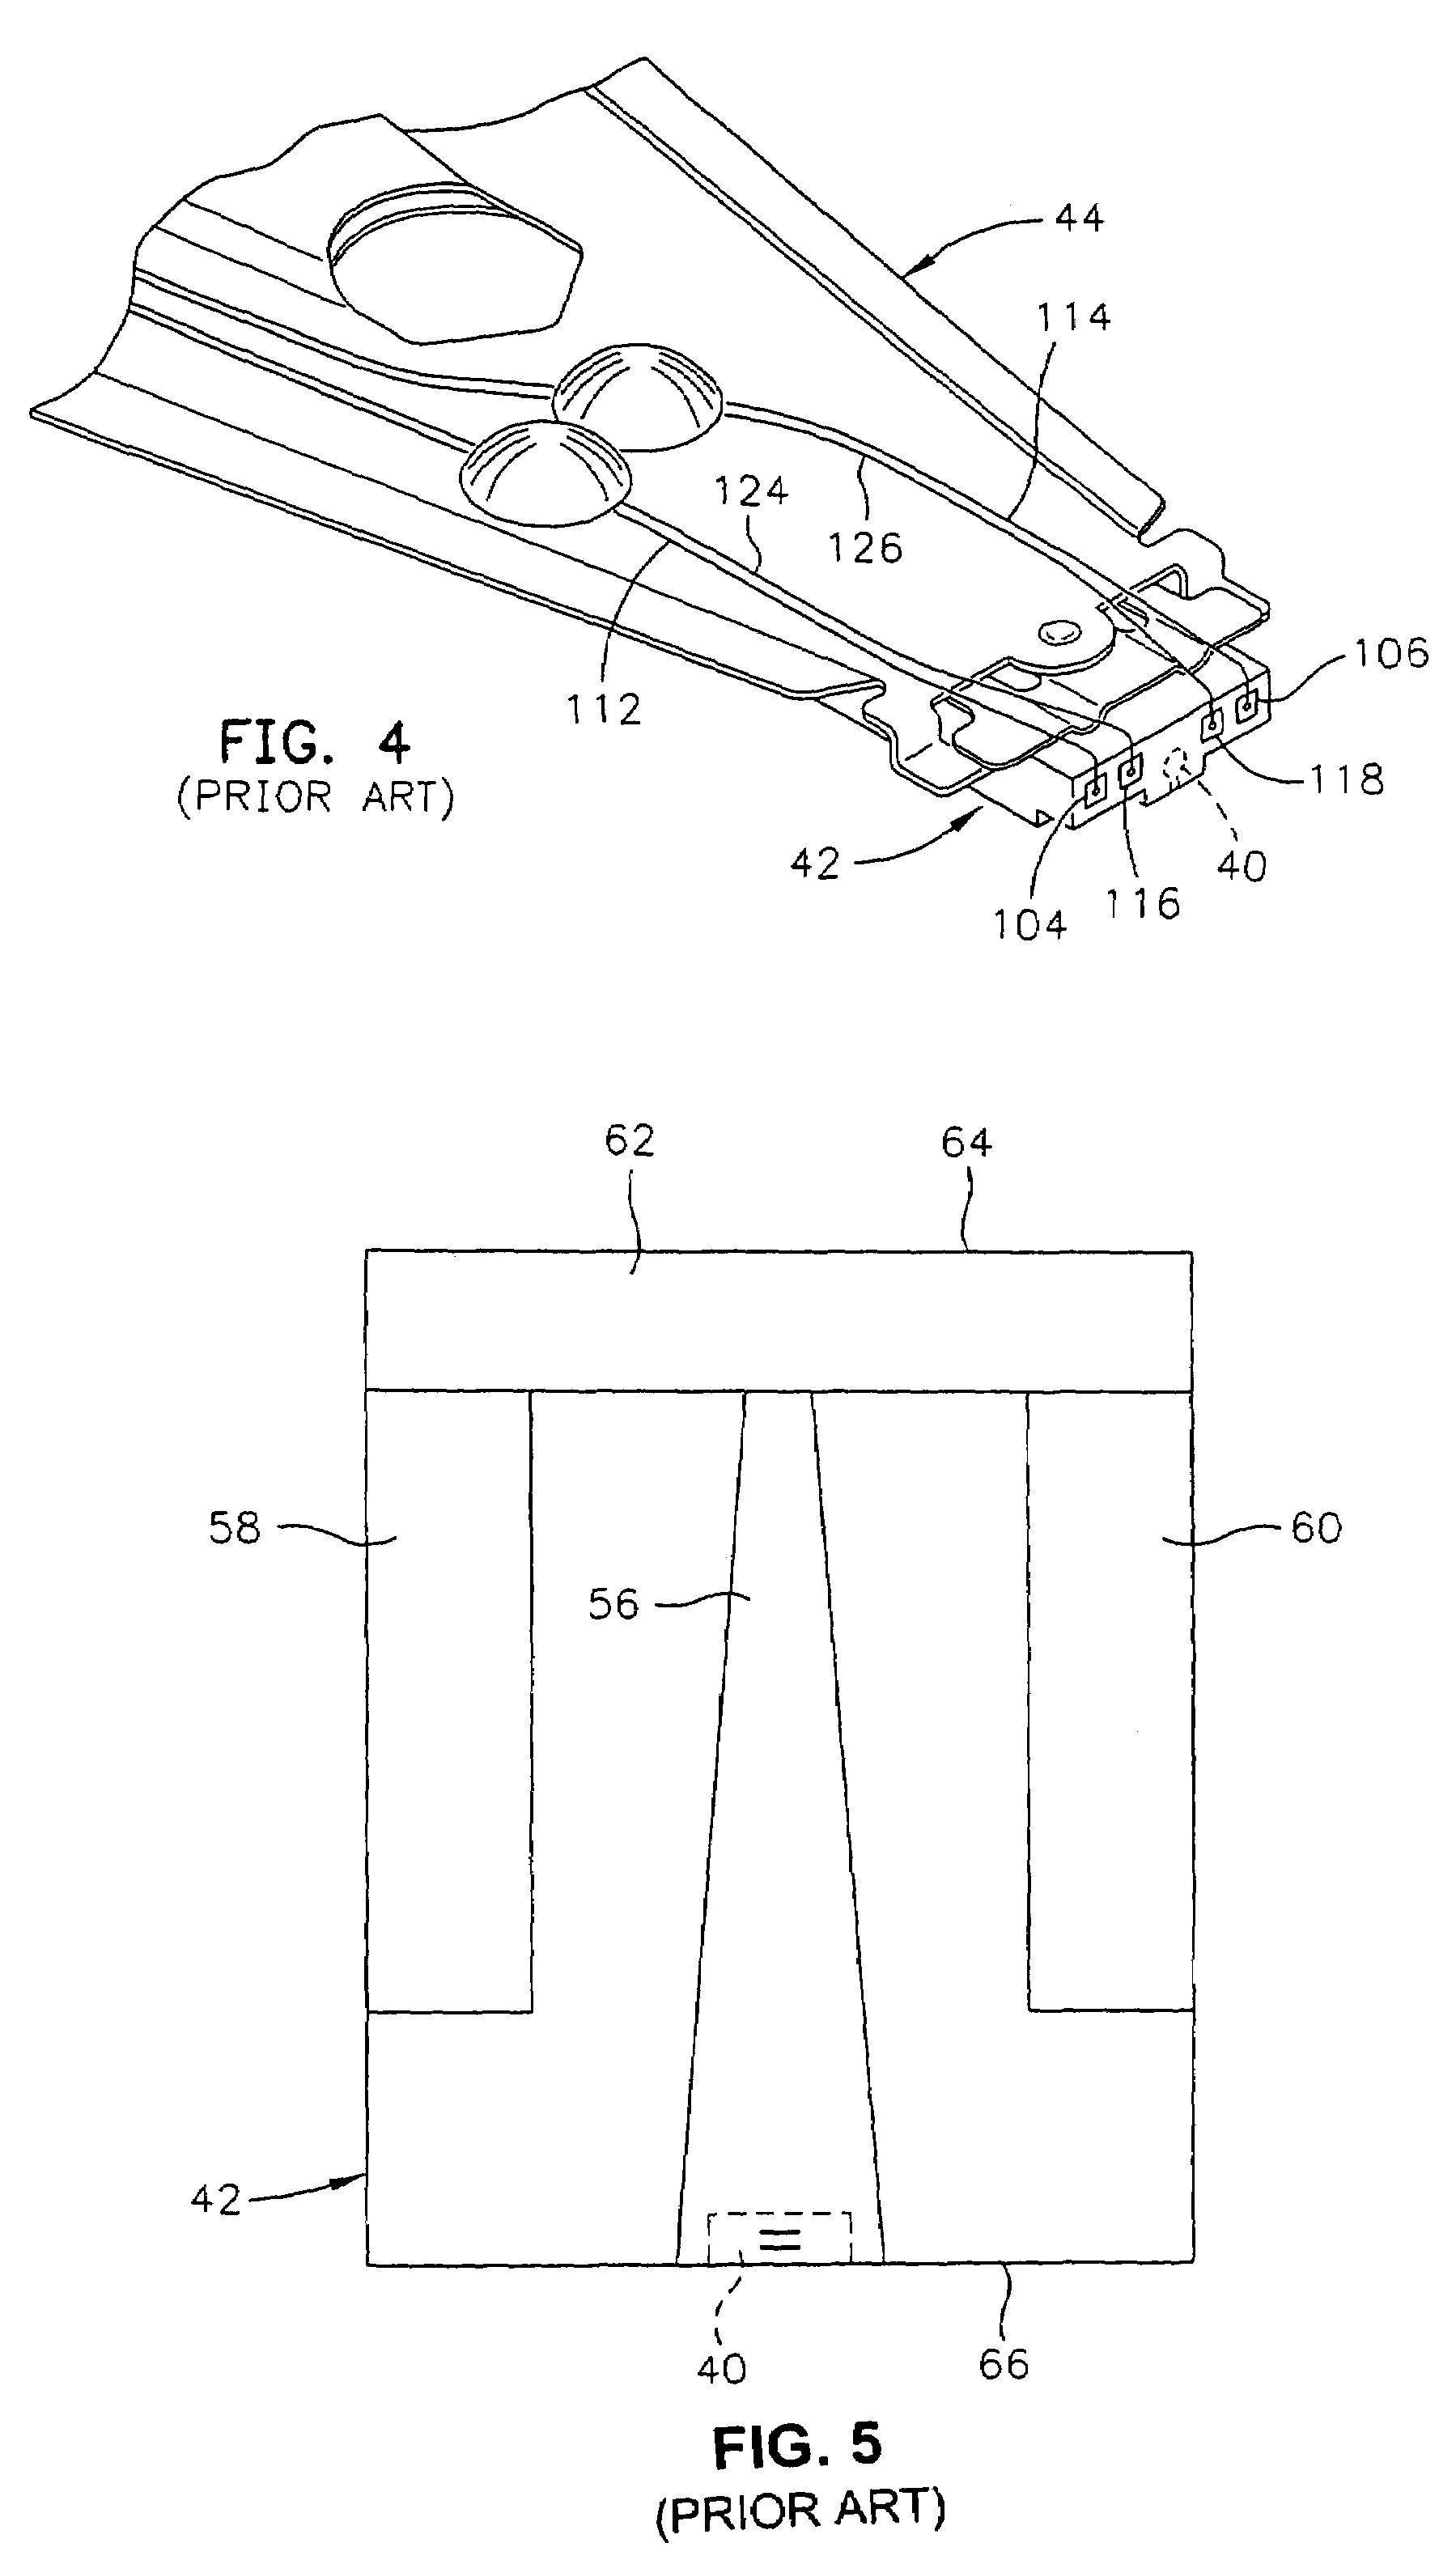 Method for resetting pinned layer magnetization in a magnetoresistive sensor